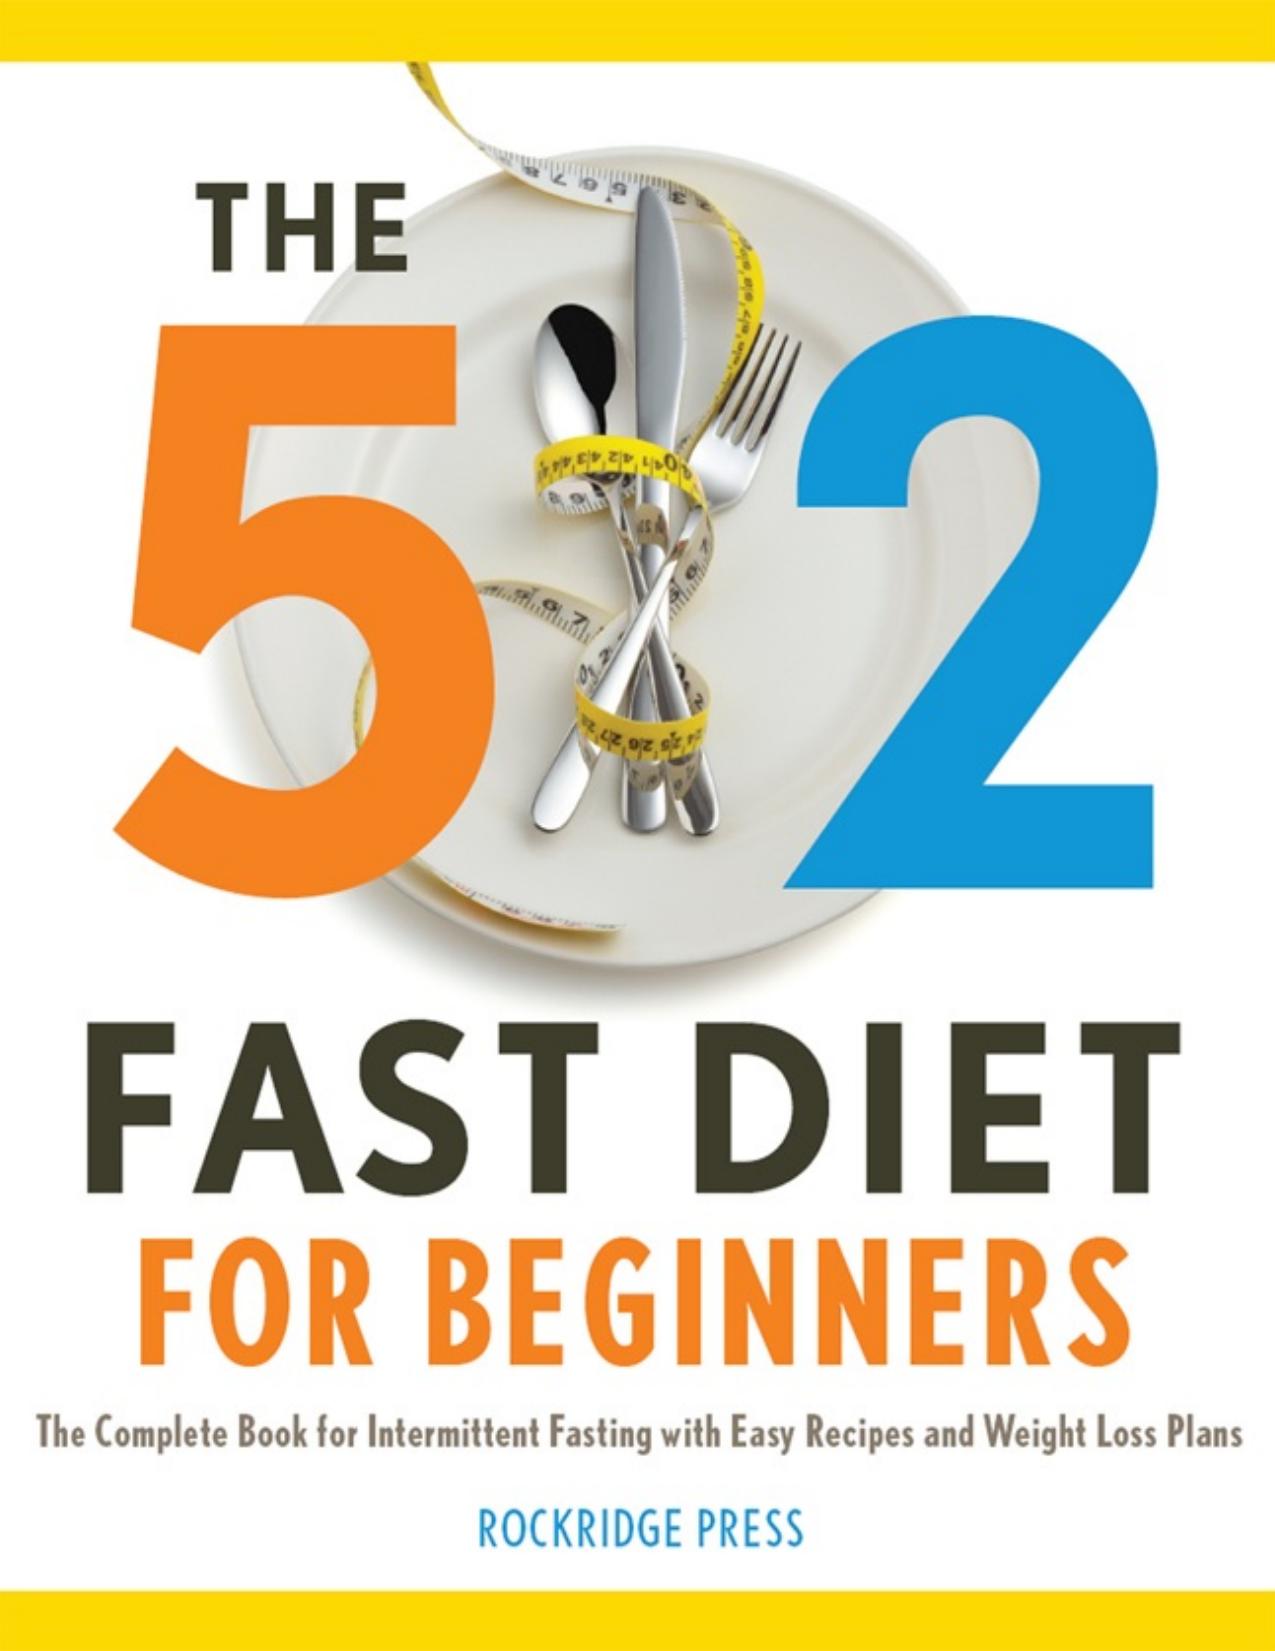 The 5:2 Fast Diet for Beginners. The Complete Book for Intermittent Fasting with Easy Recipes and Weight Loss... - PDFDrive.com